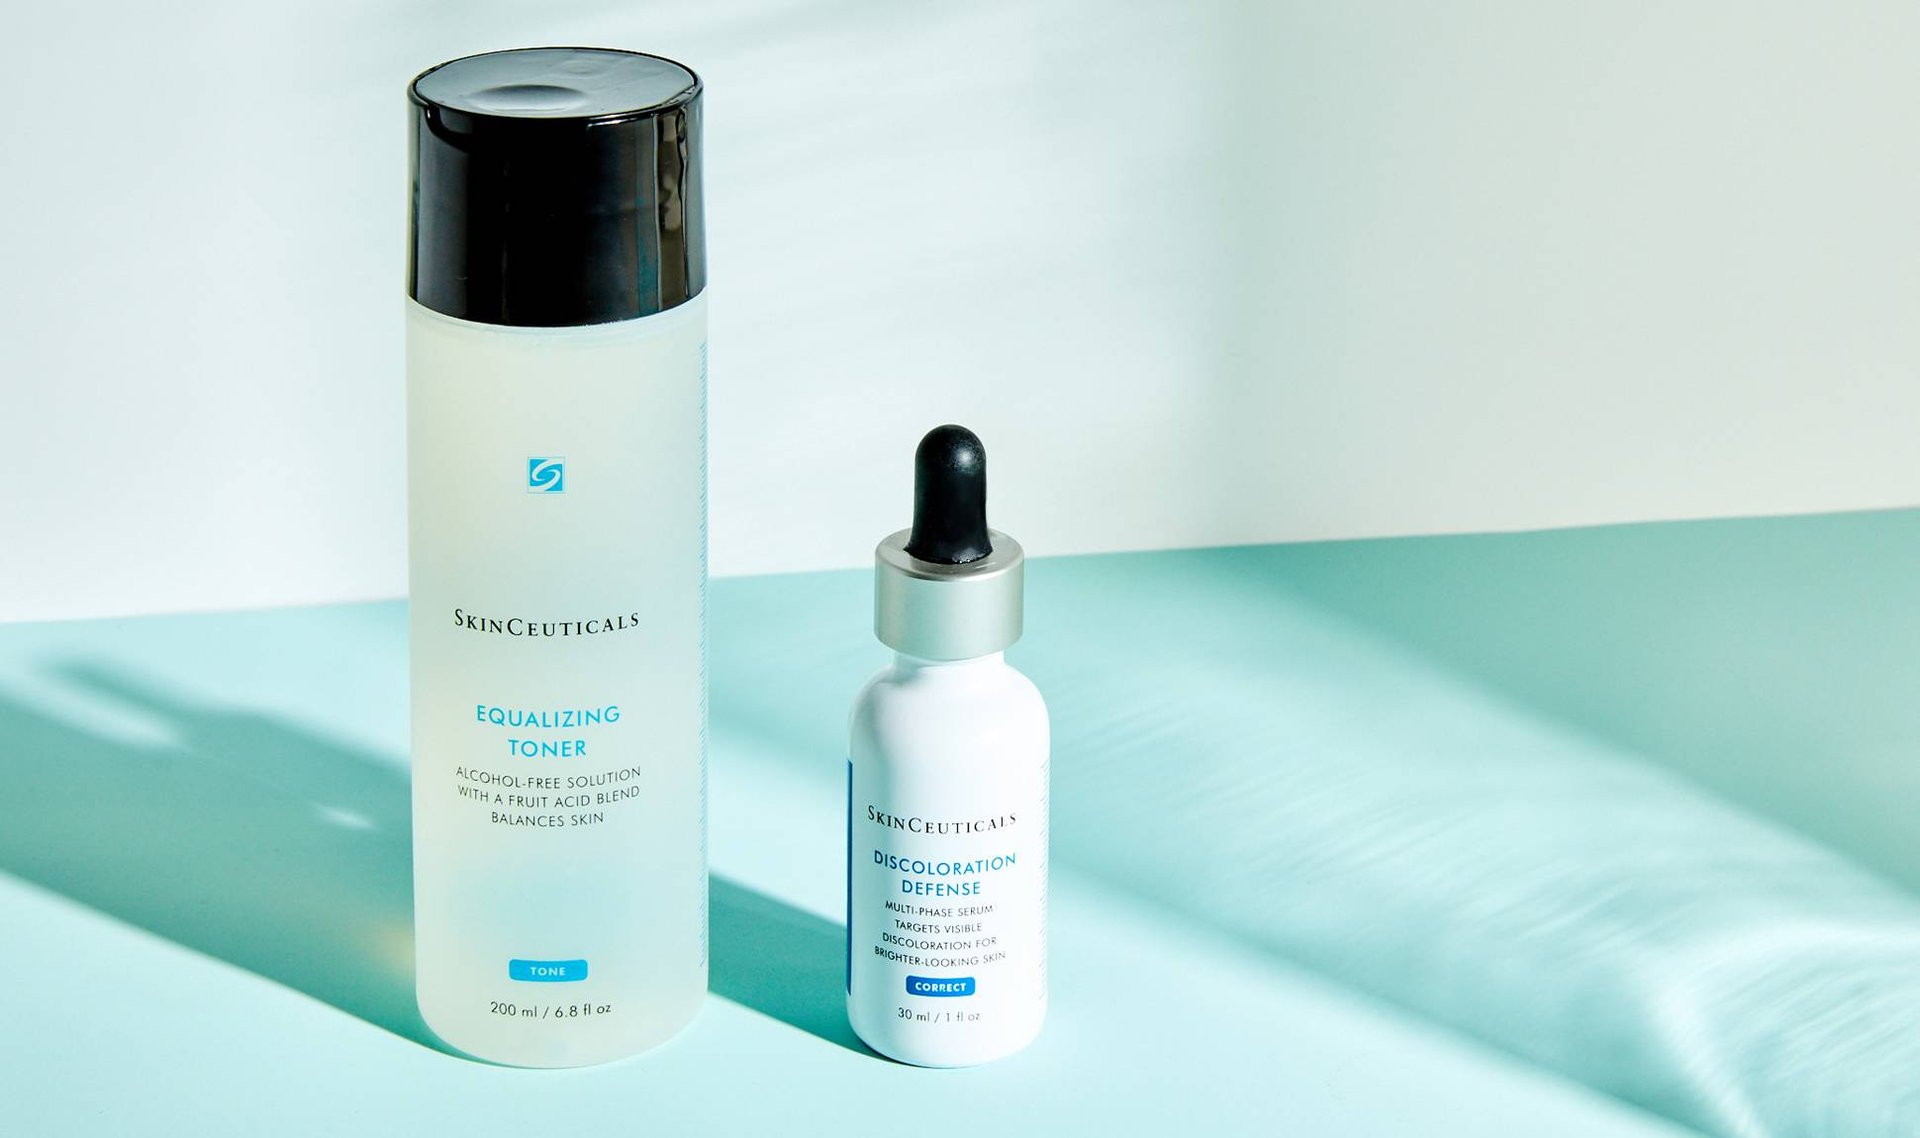 Do You Really Need Both a Serum and a Toner? Two Skincare.com Experts Weigh In